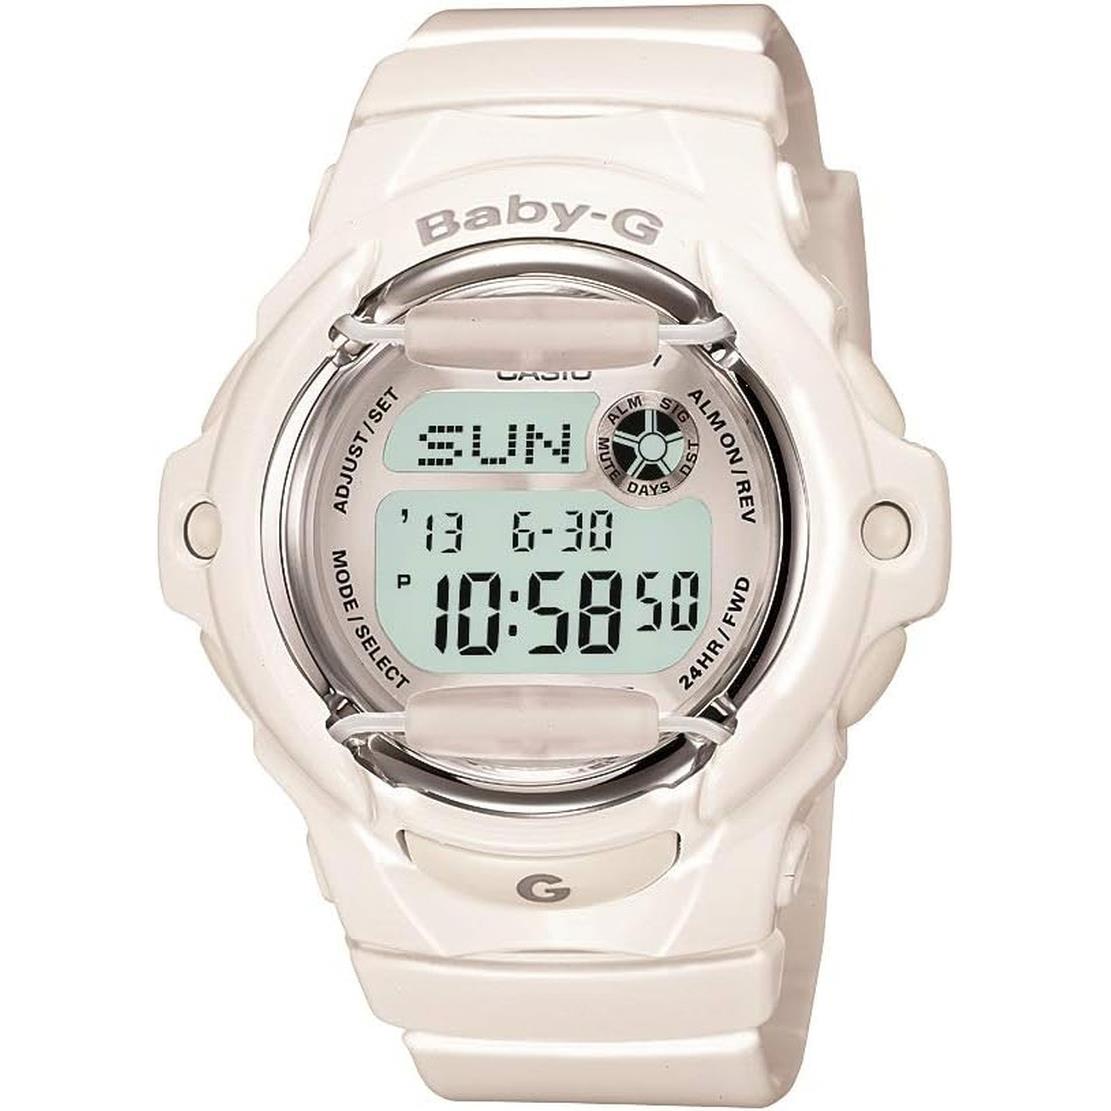 Casio Women`s Baby G Quartz Illuminated Watch with Resin Strap Colors Choices